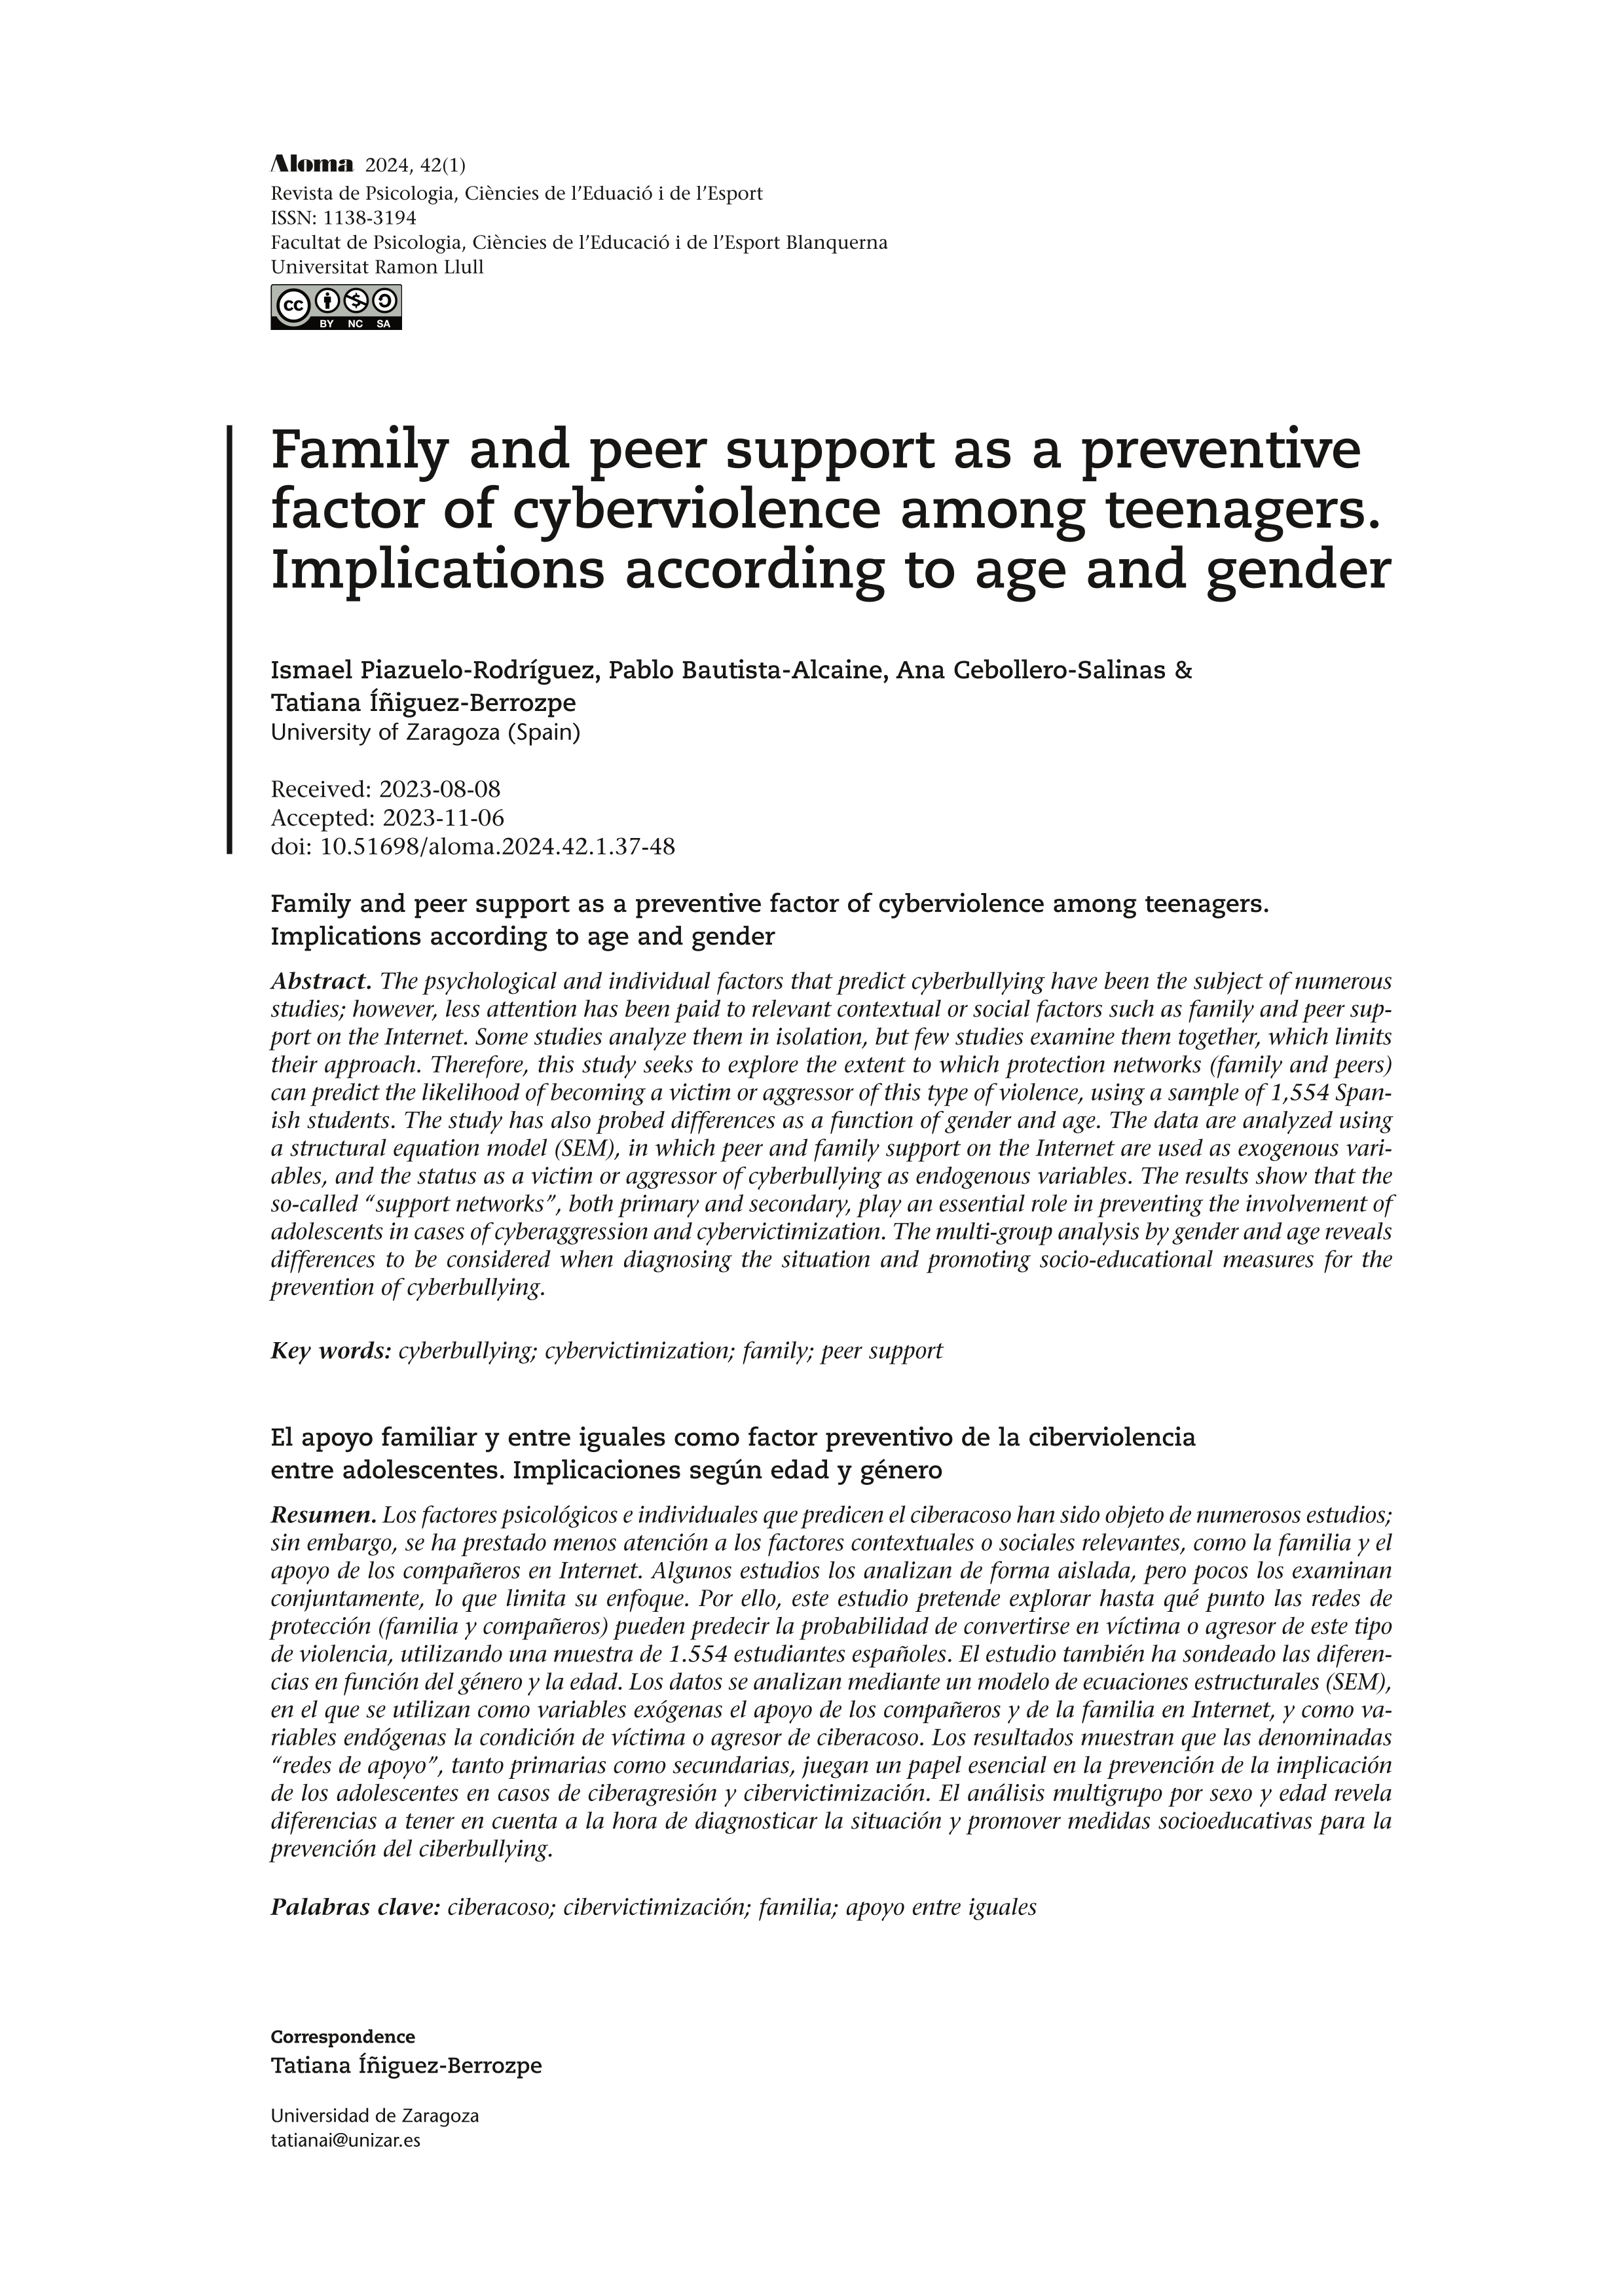 Family and peer support as a preventive factor of cyberviolence among teenagers. Implications according to age and gender